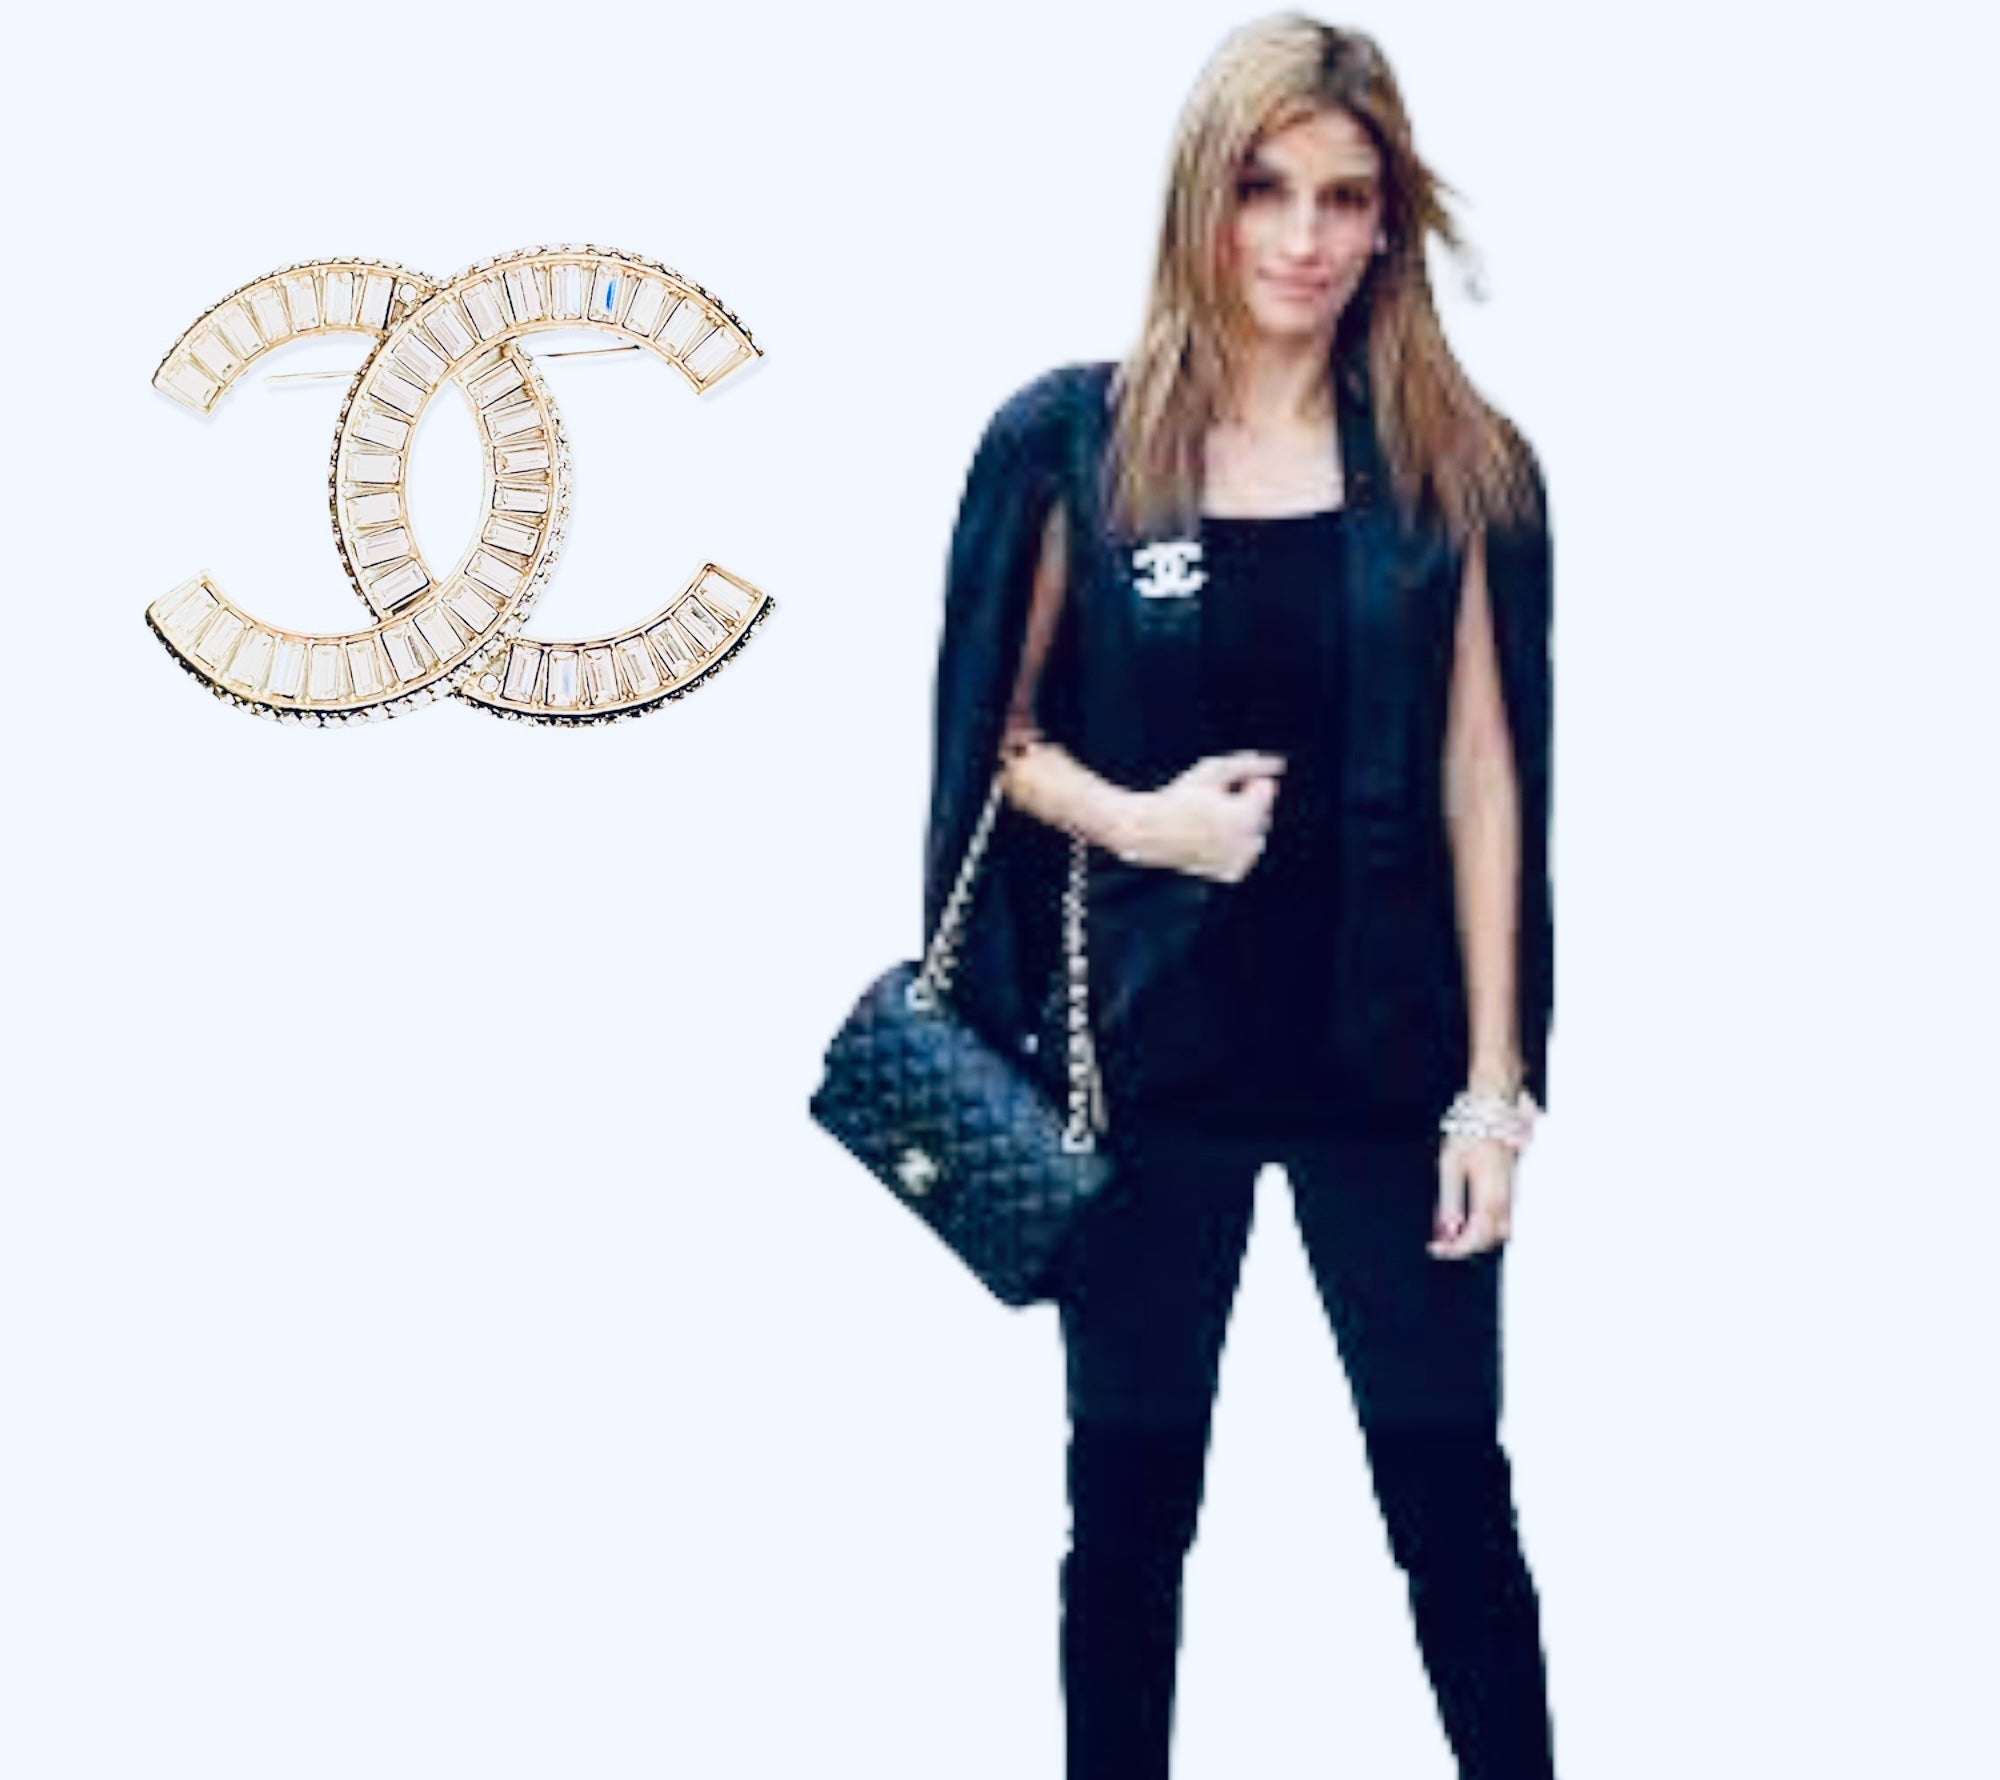 Chanel vinyl gold tote bag with large CC logo crystal diamante